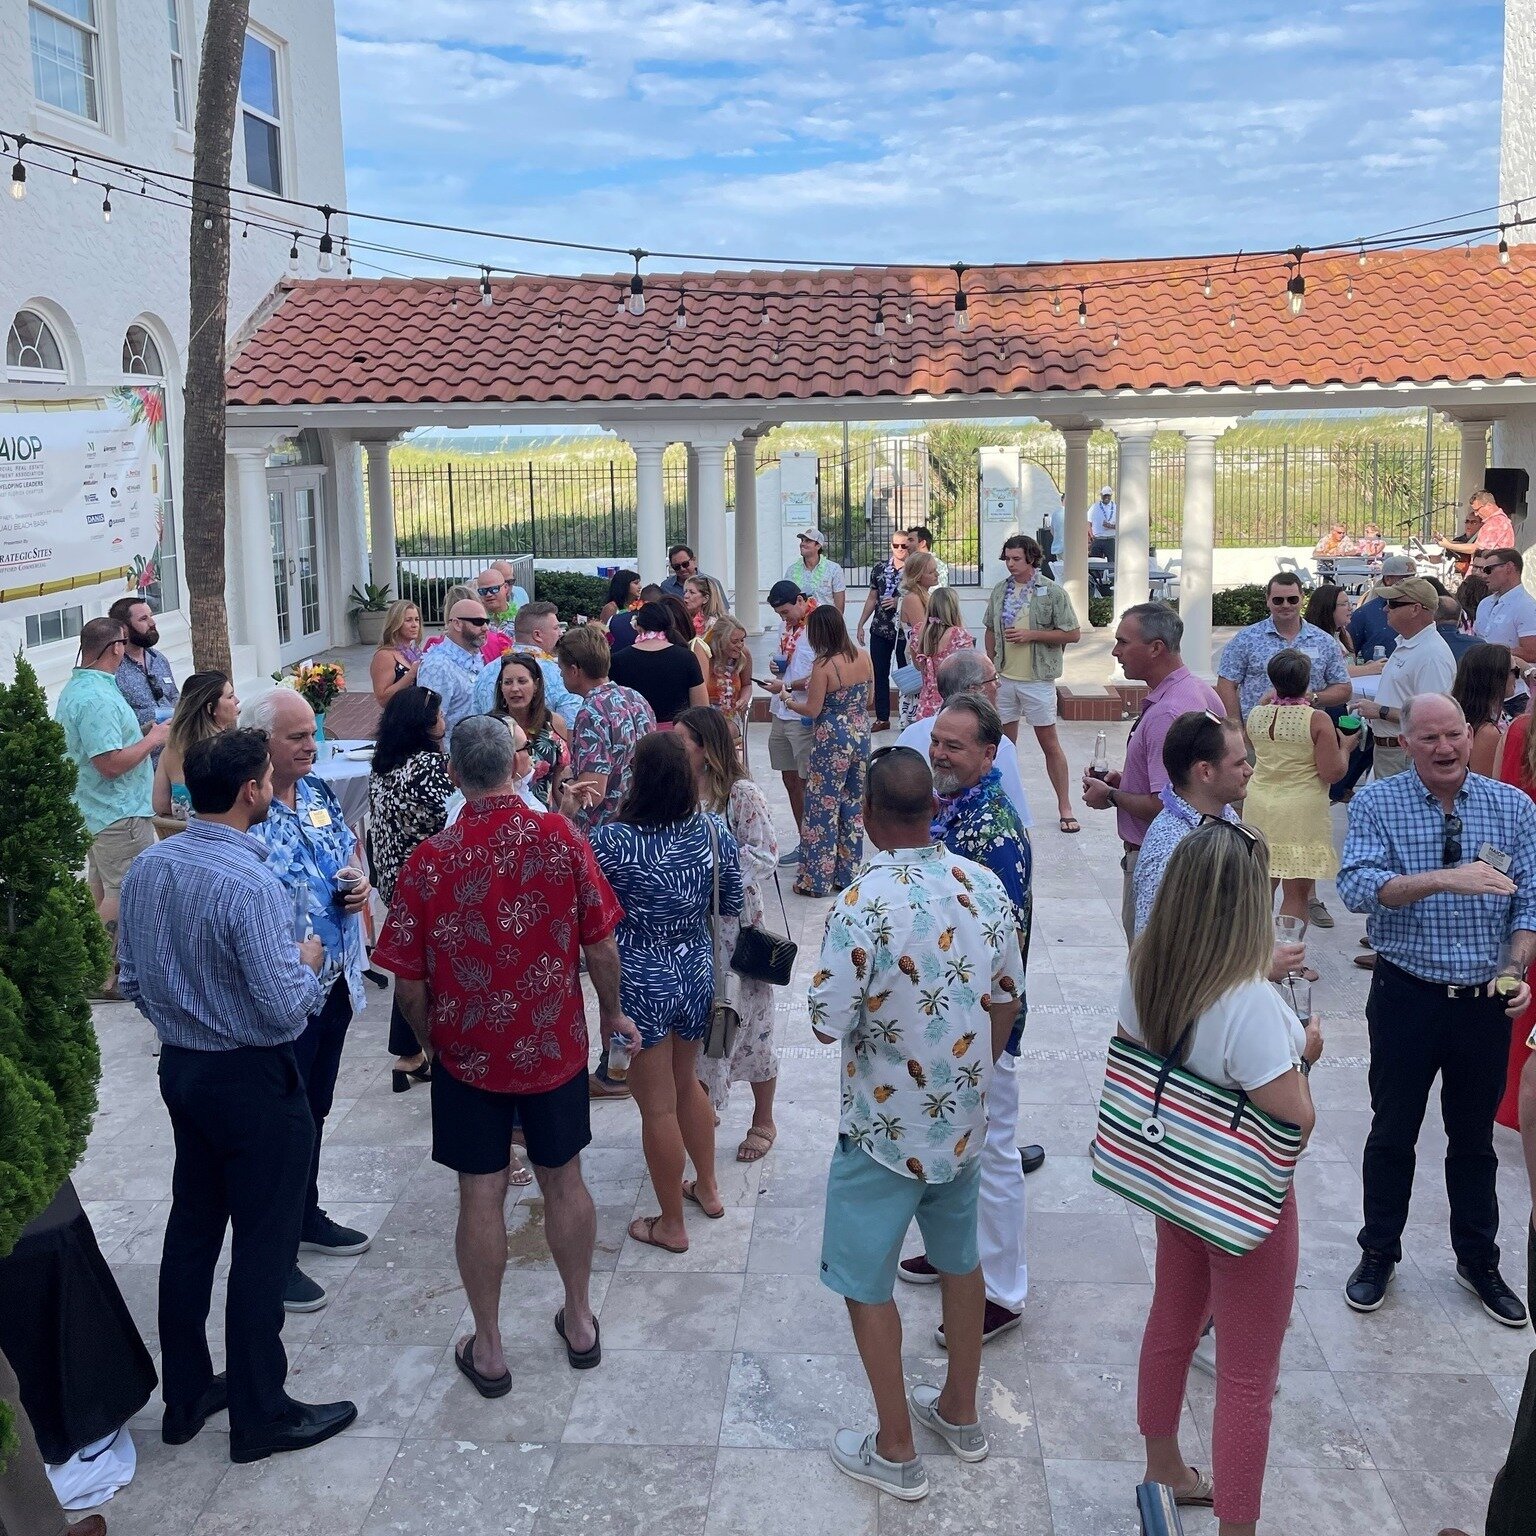 We couldn't have asked for better weather as we spent the evening networking at the NAIOP NEFL Developing Leaders annual Beach Bash.  And of course, we had to celebrate our very own, Clay Weaver's upcoming birthday! #strategicsites #beachbash #naiopn